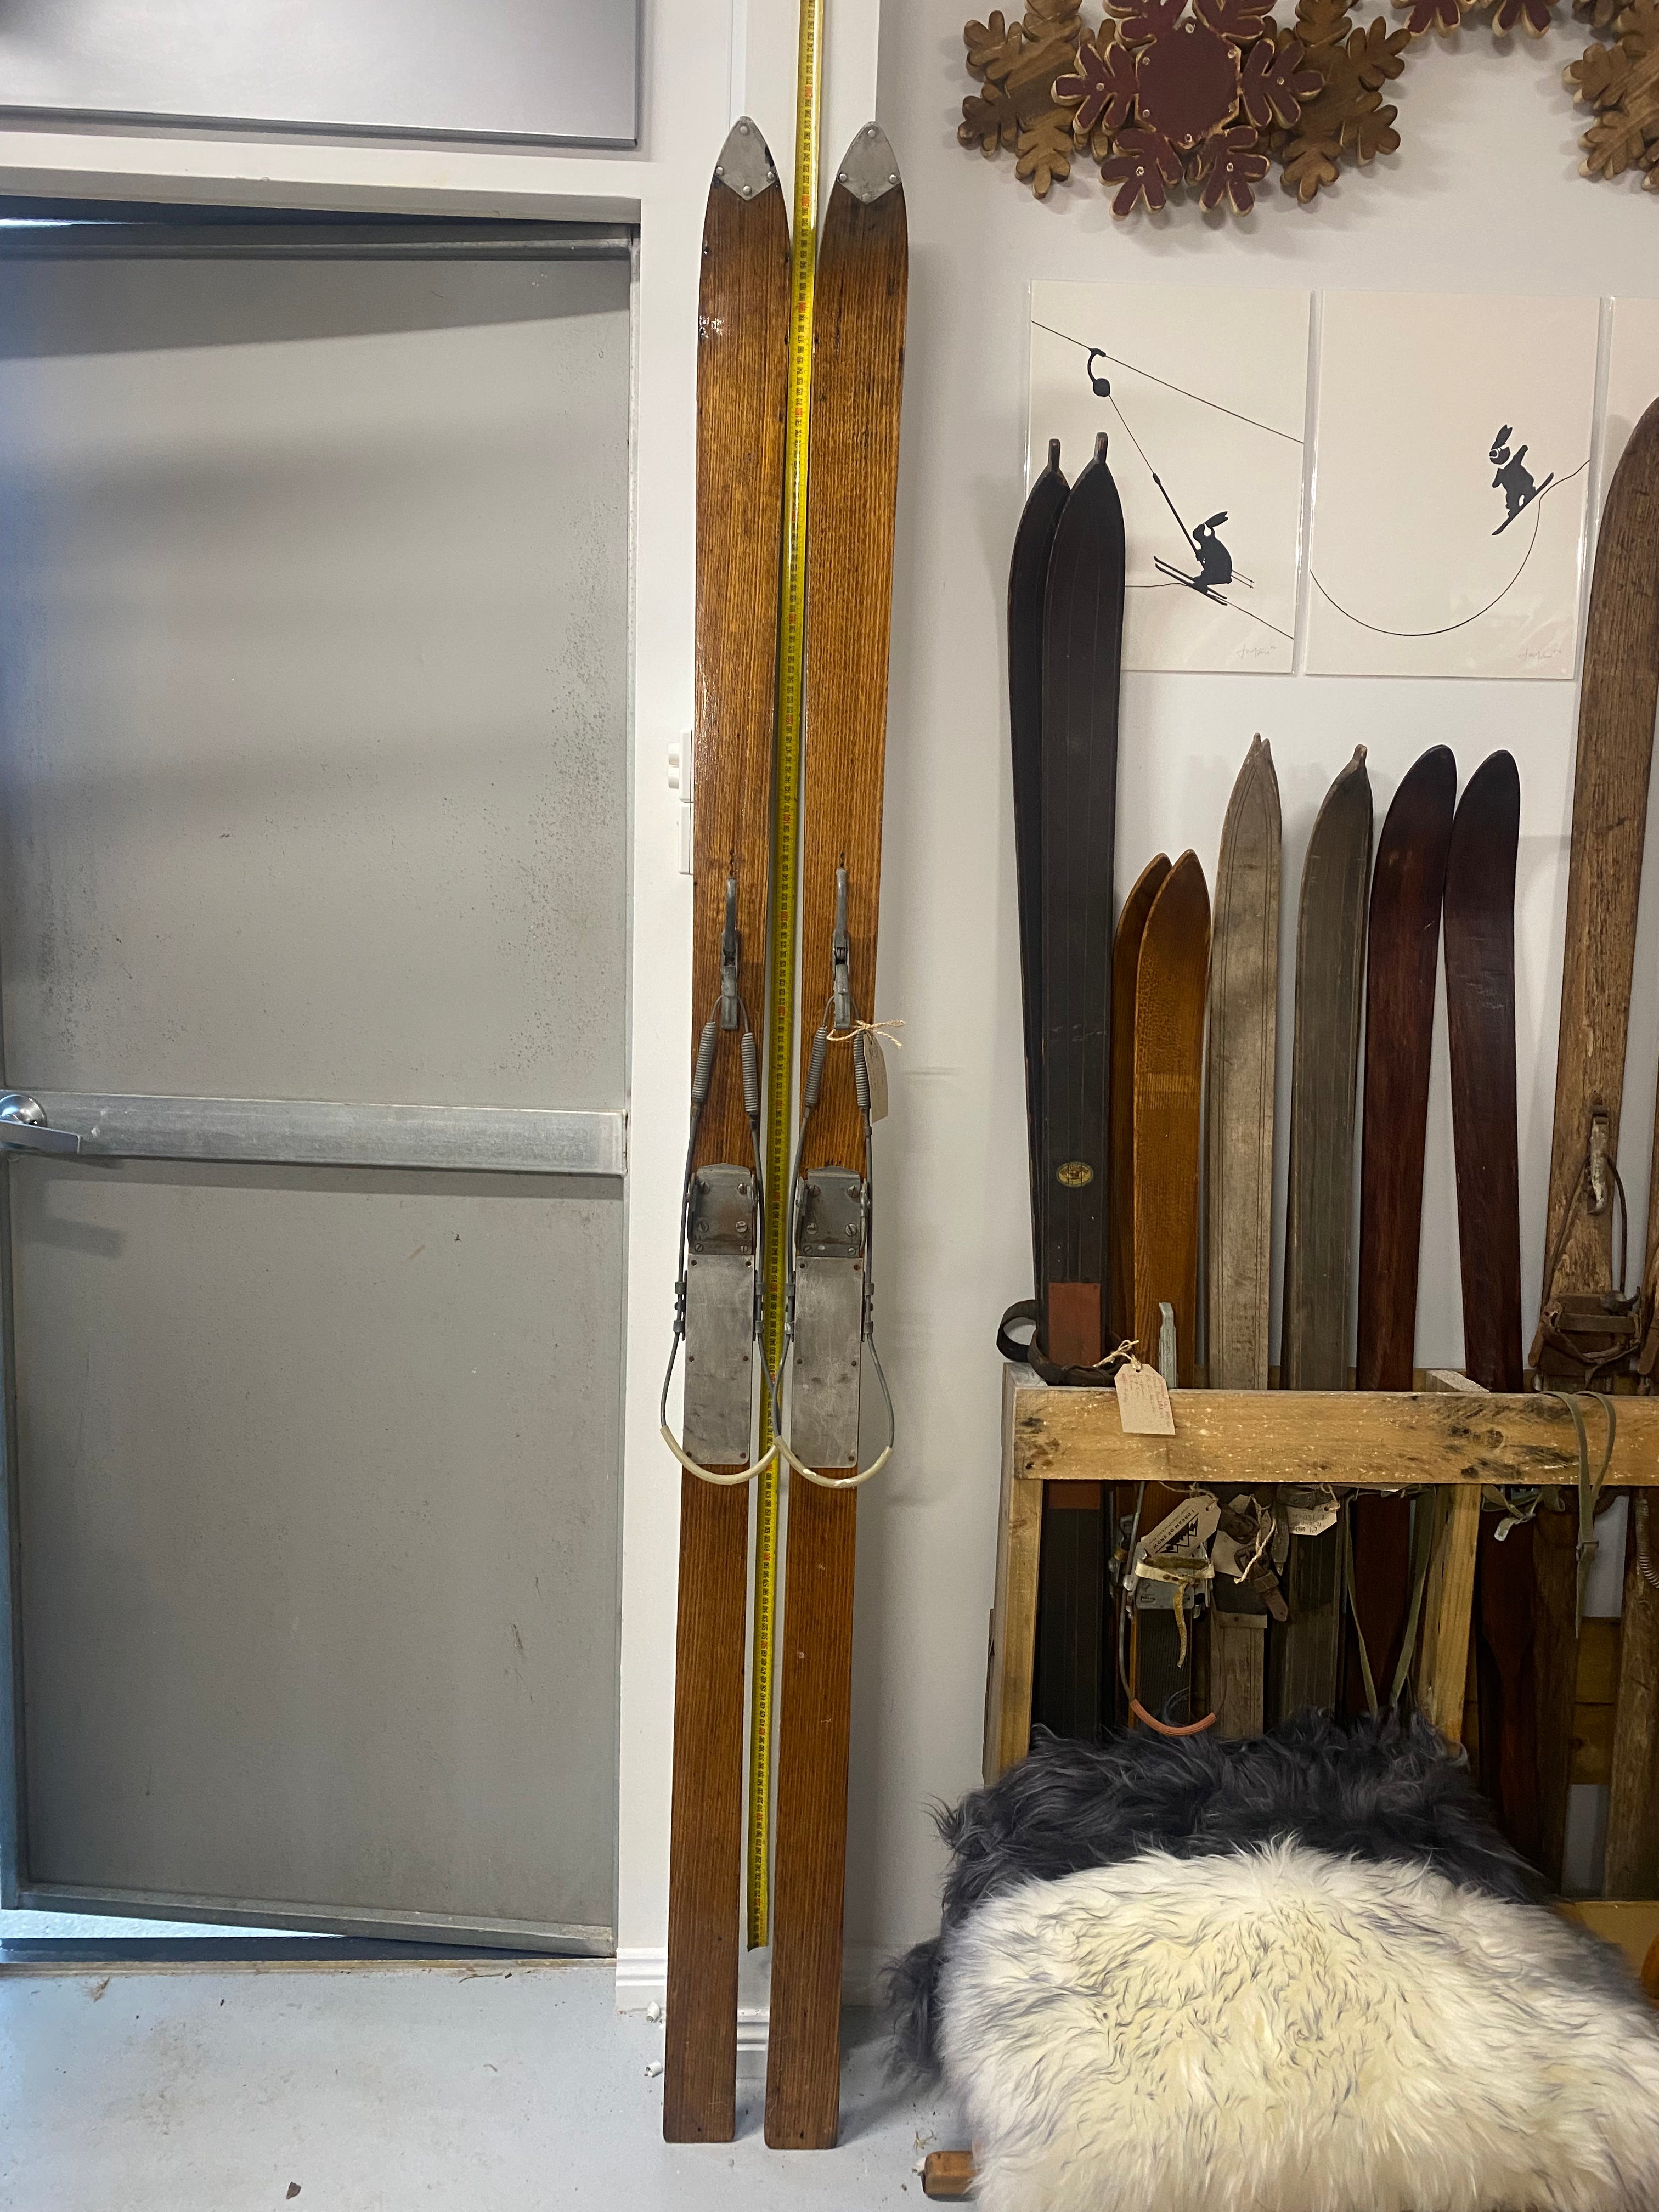 Full Height Front View: Vintage Wooden Skis with metal bindings. Lent against a white wall, with more vintage wooden skis stacked to the right hand side, sheep skins on the floor and posters above the skis.